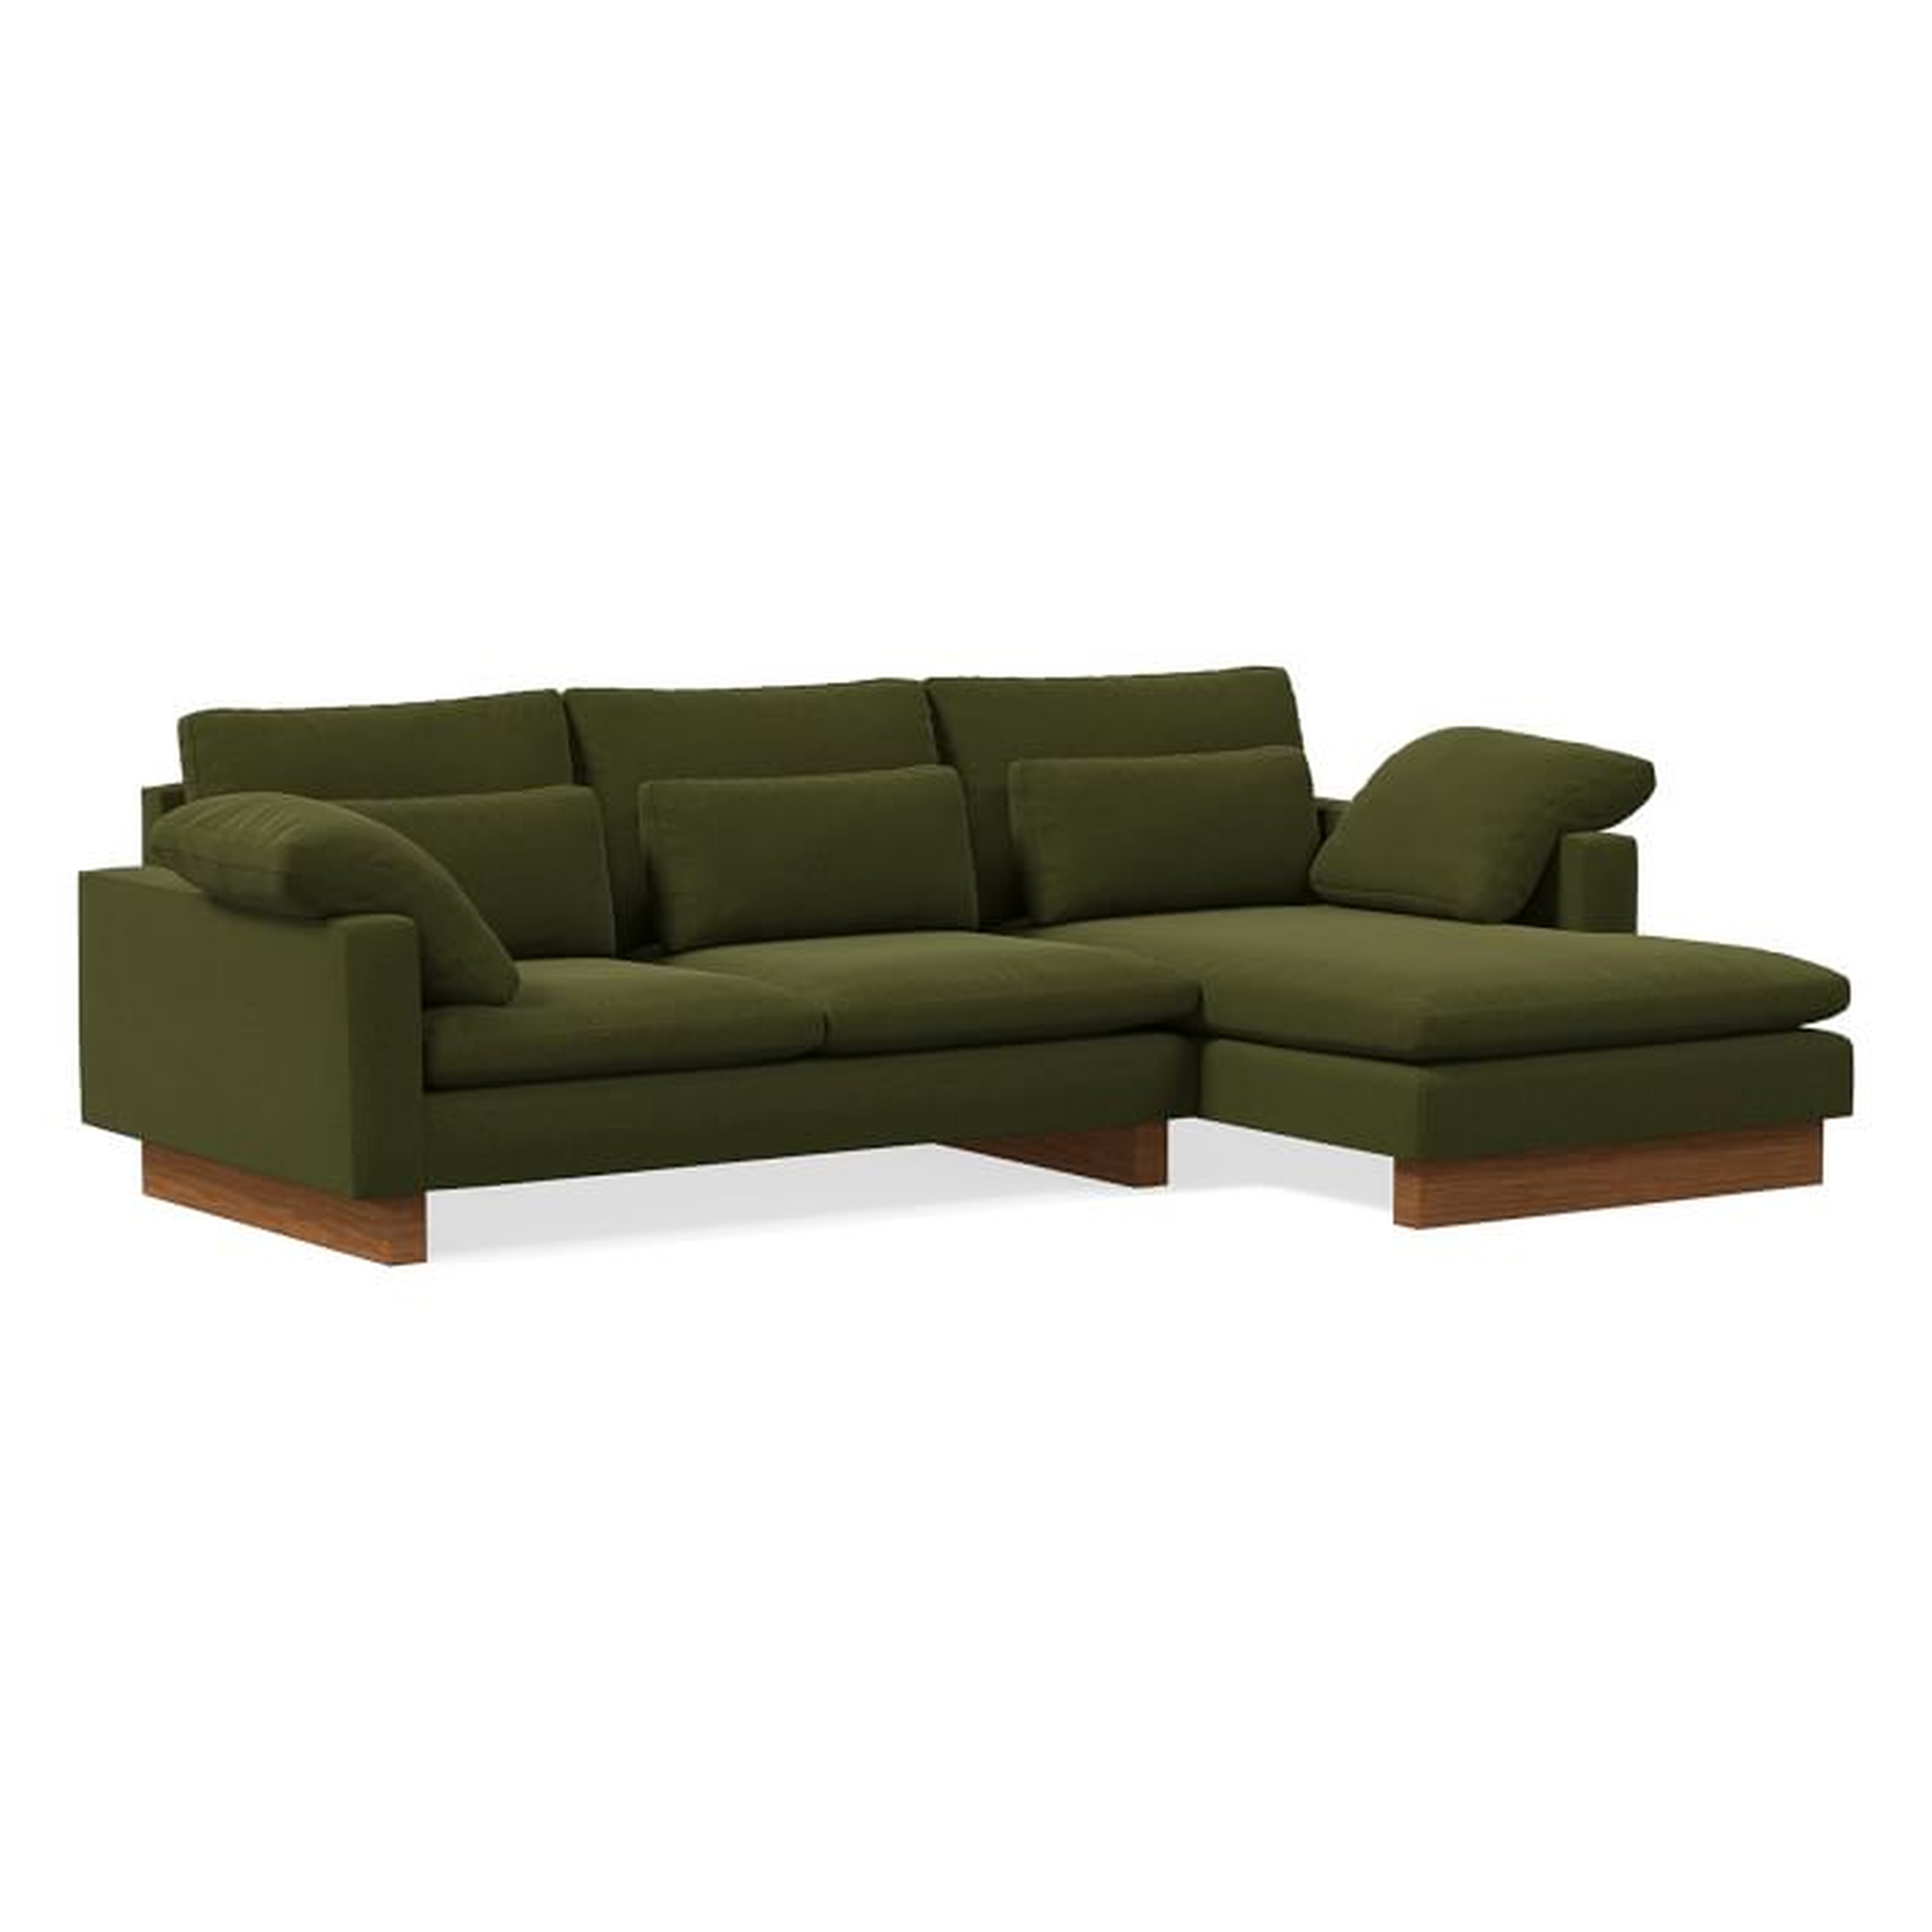 Harmony Sectional Set 01: Left Arm 2.5 Seater Sofa, Right Arm Chaise, Distressed Velvet, Olive, Dark Walnut, Down - West Elm